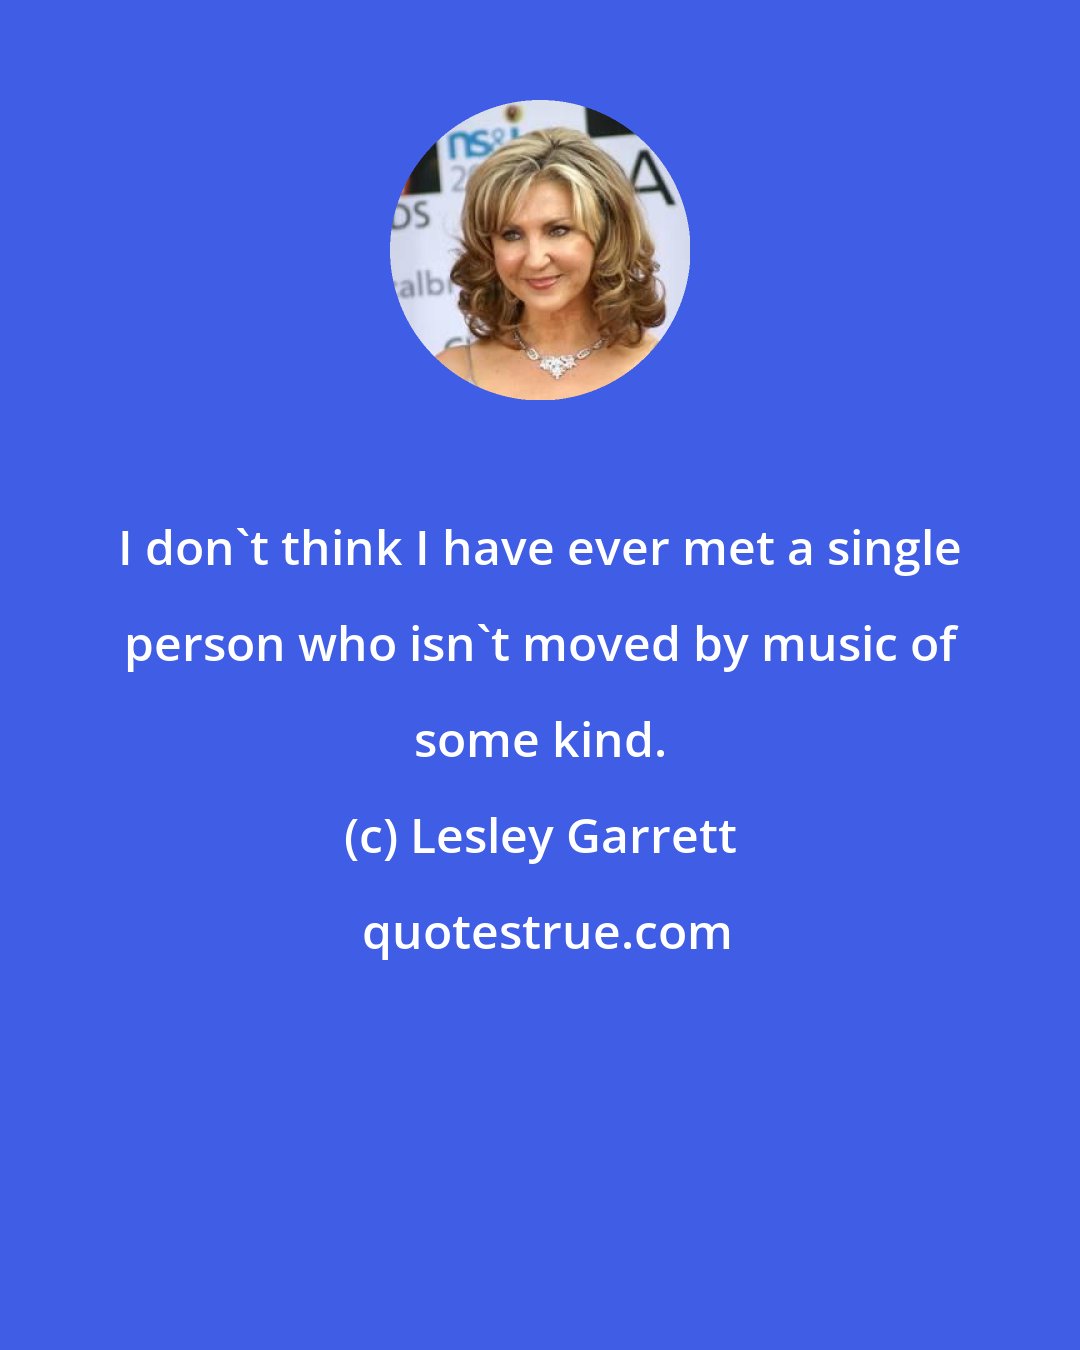 Lesley Garrett: I don't think I have ever met a single person who isn't moved by music of some kind.